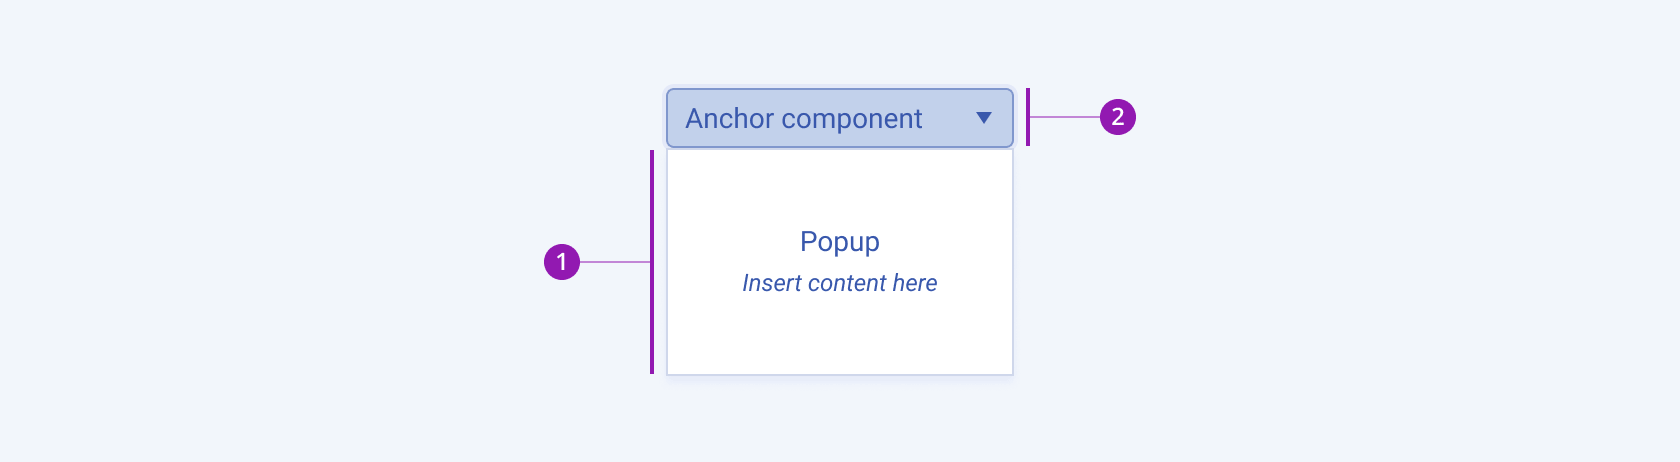 A Telerik and Kendo UI Popup component with a container and anchor component elements.